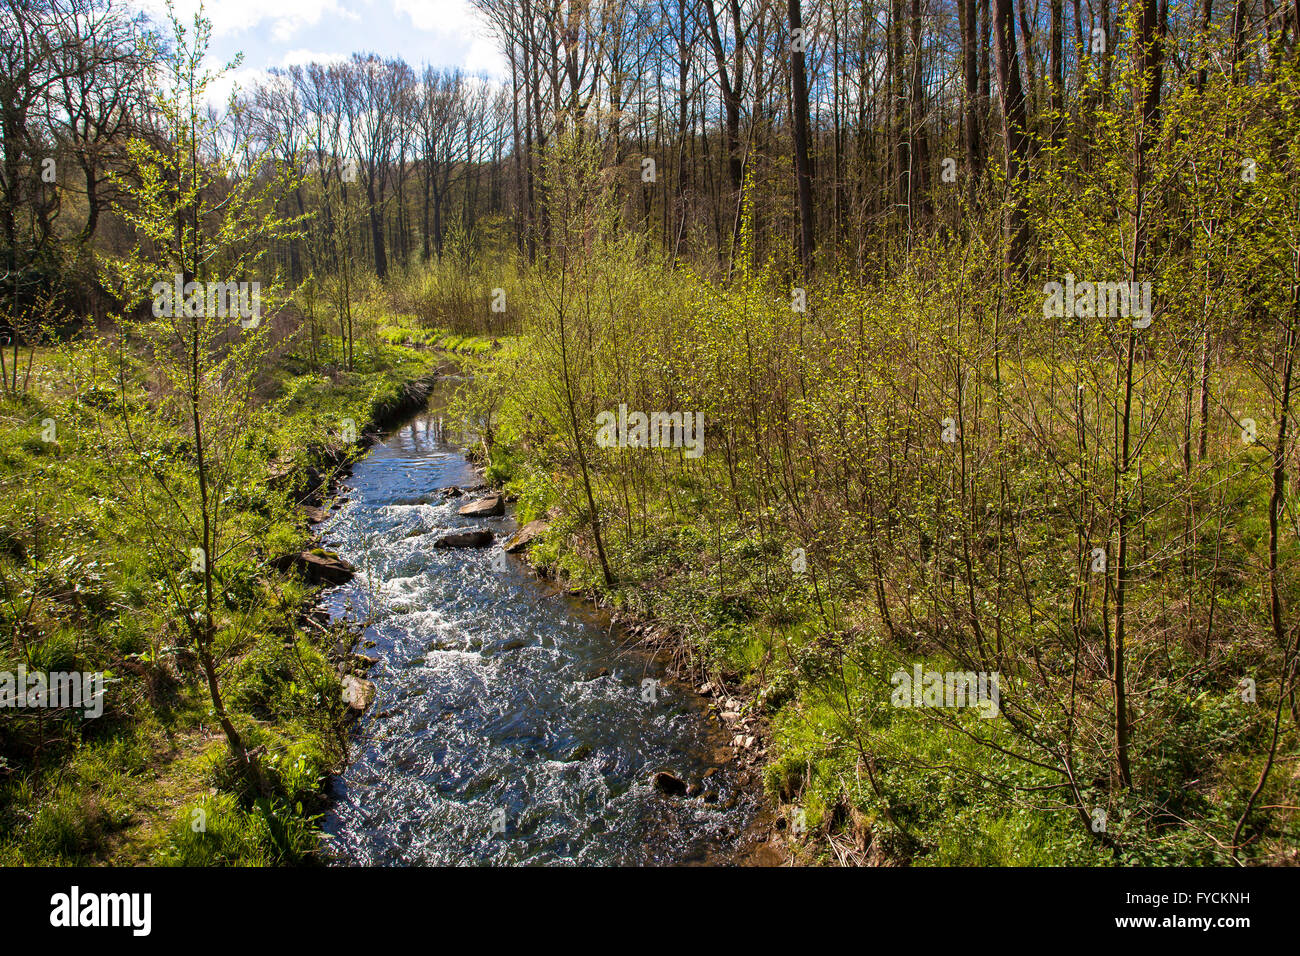 Europe, Germany, North Rhine-Westphalia, Dortmund, the recultivated river Emscher at the nature reserve Bolmke south of the Sign Stock Photo